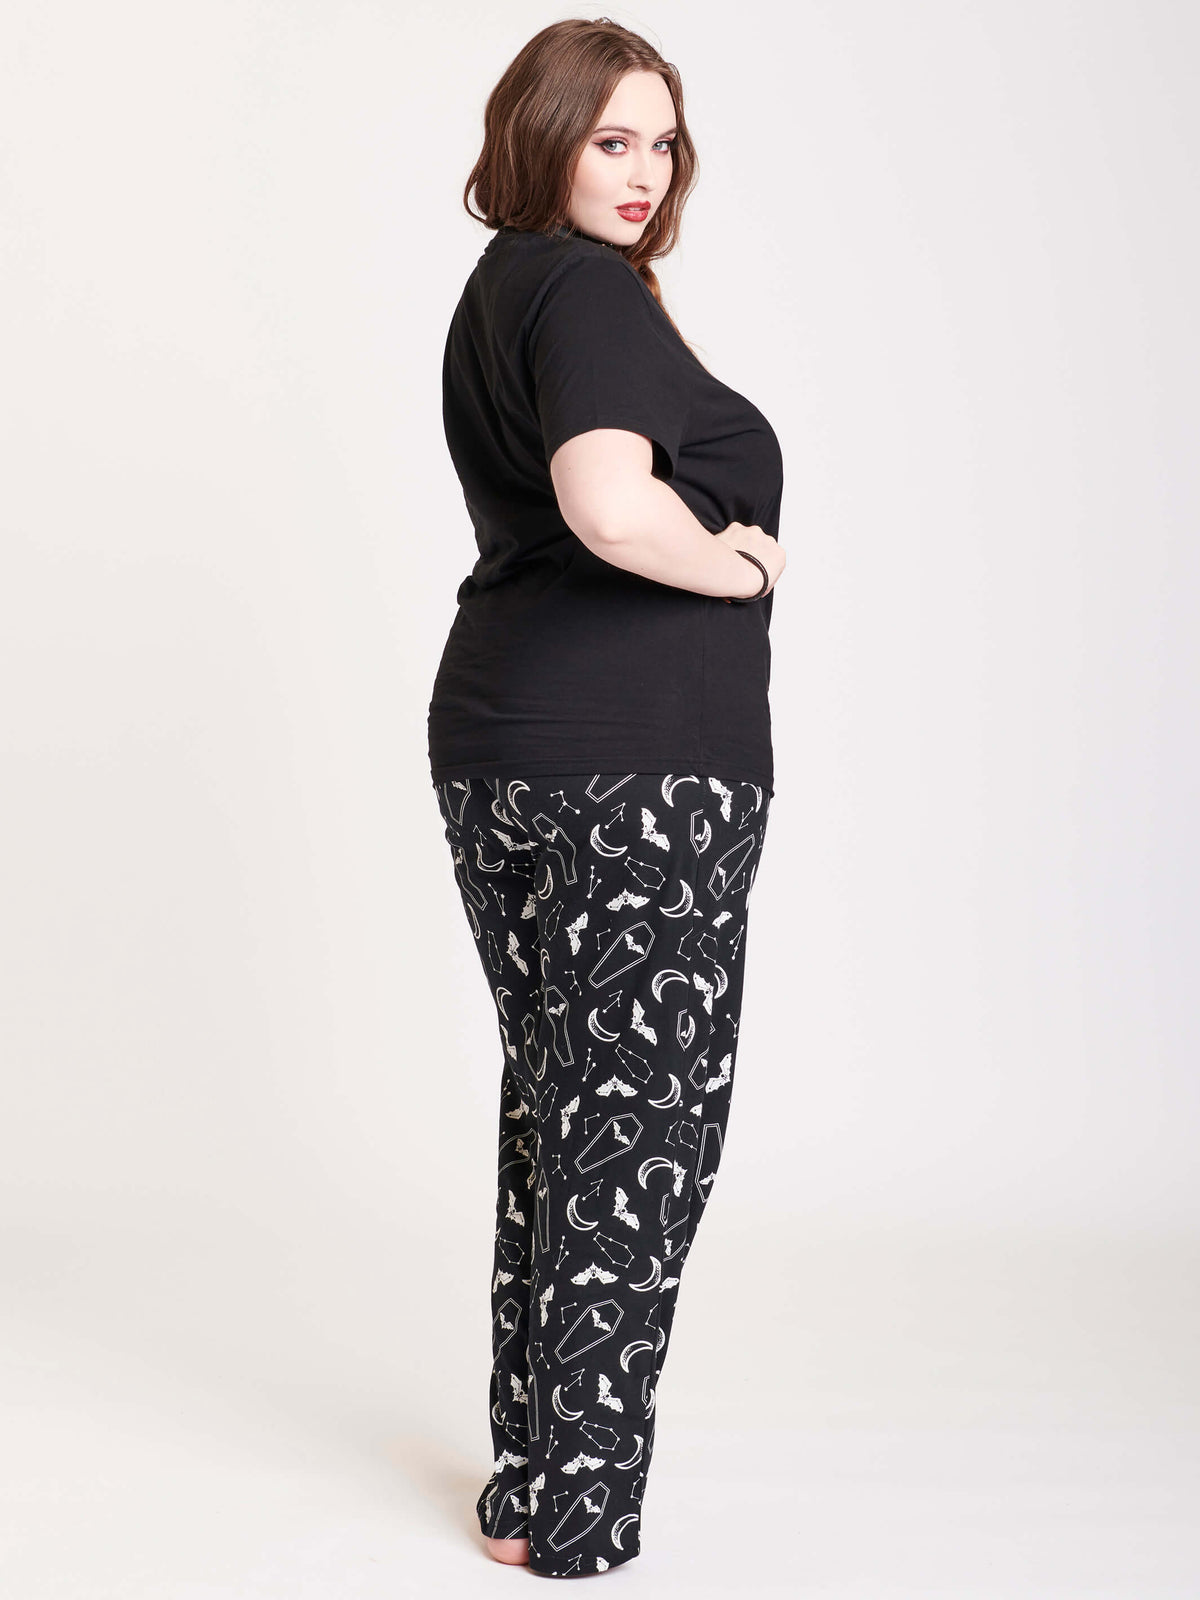 black t-shirt and sleep pants with coffin motif